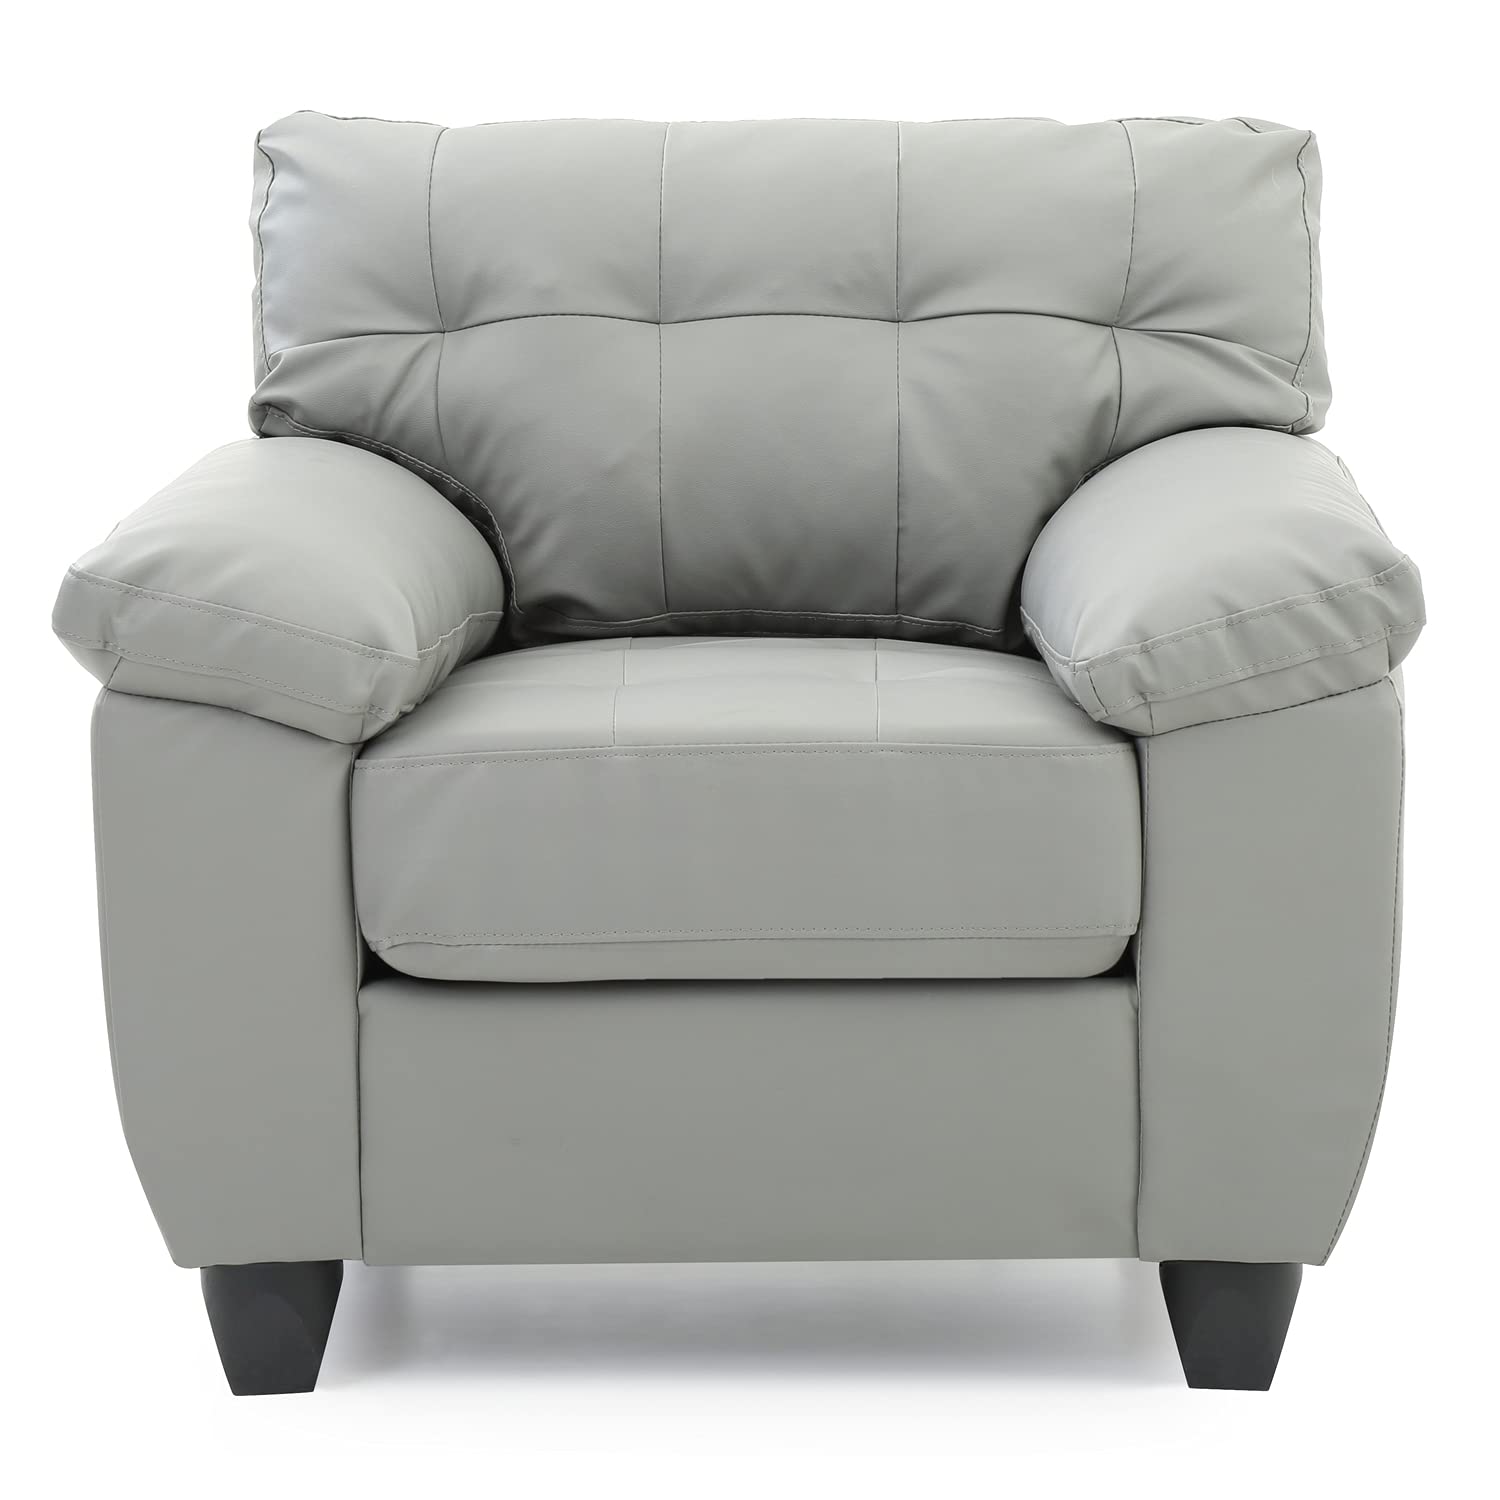 Glory Furniture Gallant Faux Leather Chair in Gray